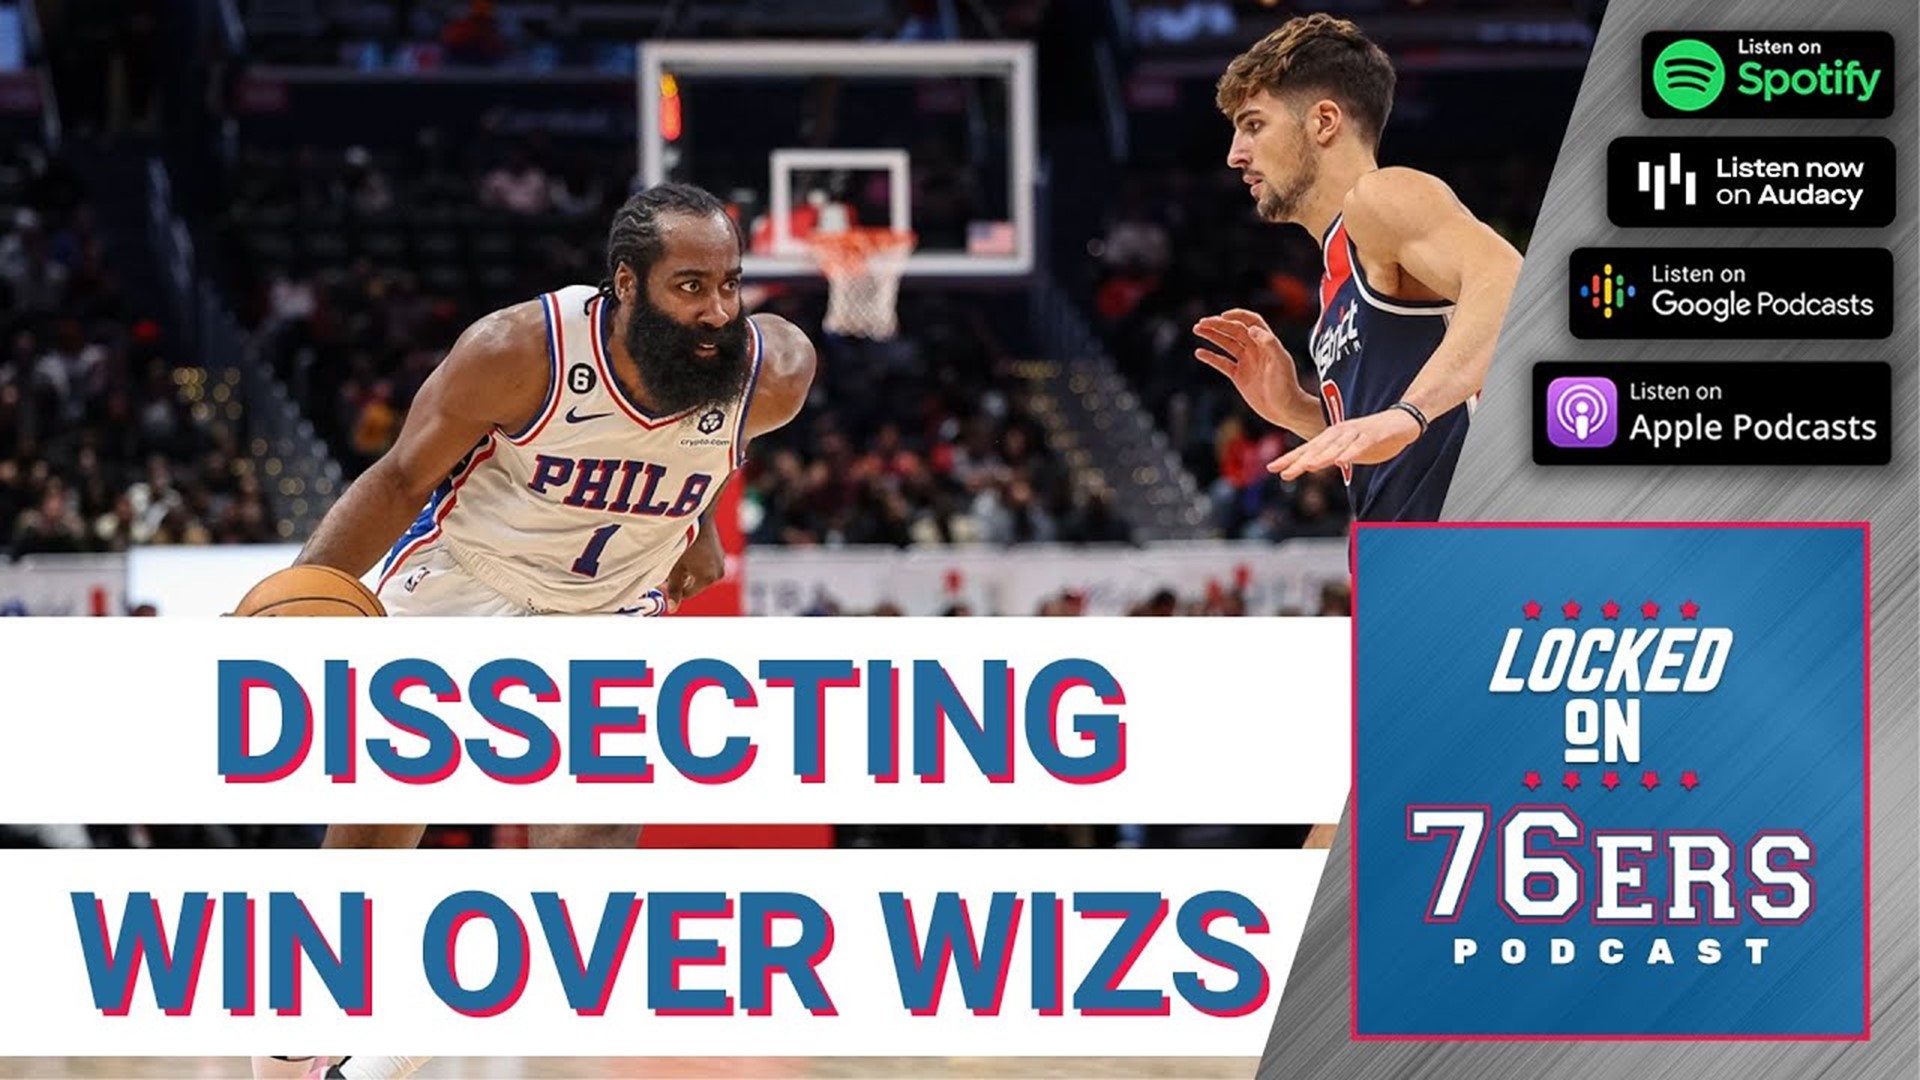 Devon Givens and Keith Pompey dissect the 76ers' victory over the Washington Wizards to improve to 4-4.